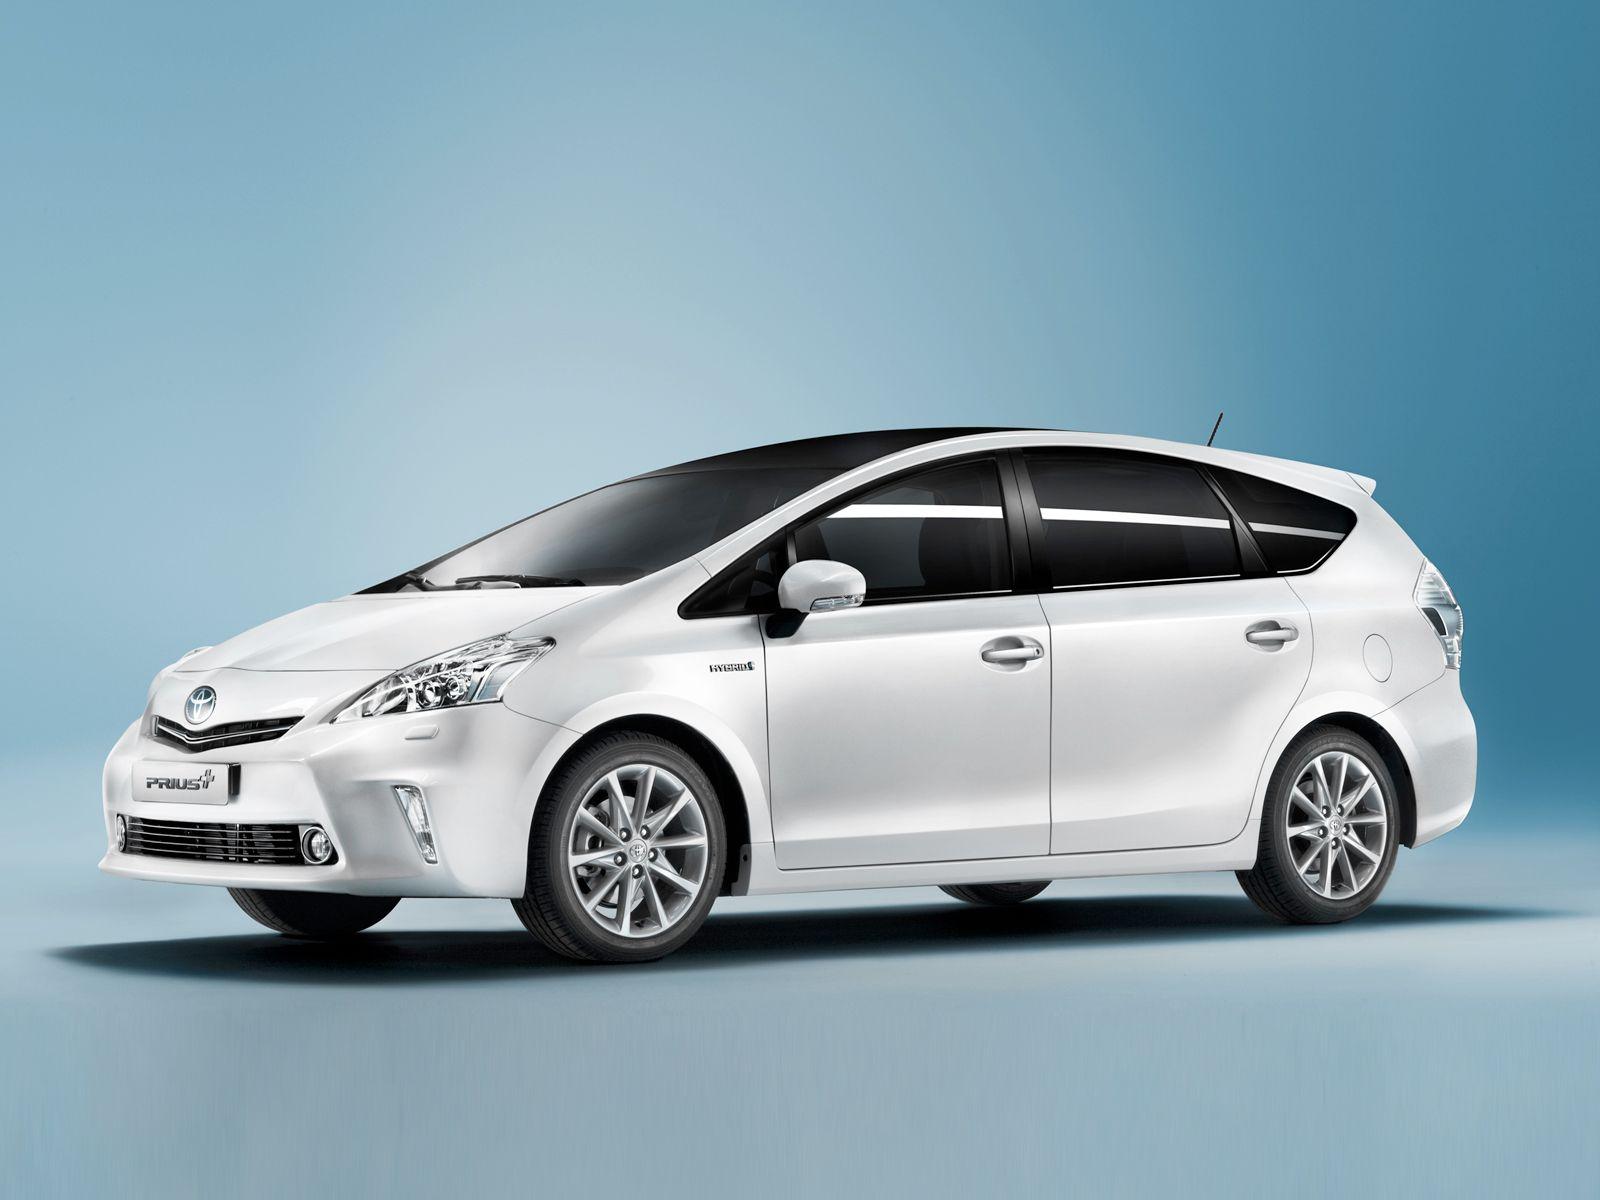 Toyota Prius Plus Image and PhotoSmall Cars Wallpaper